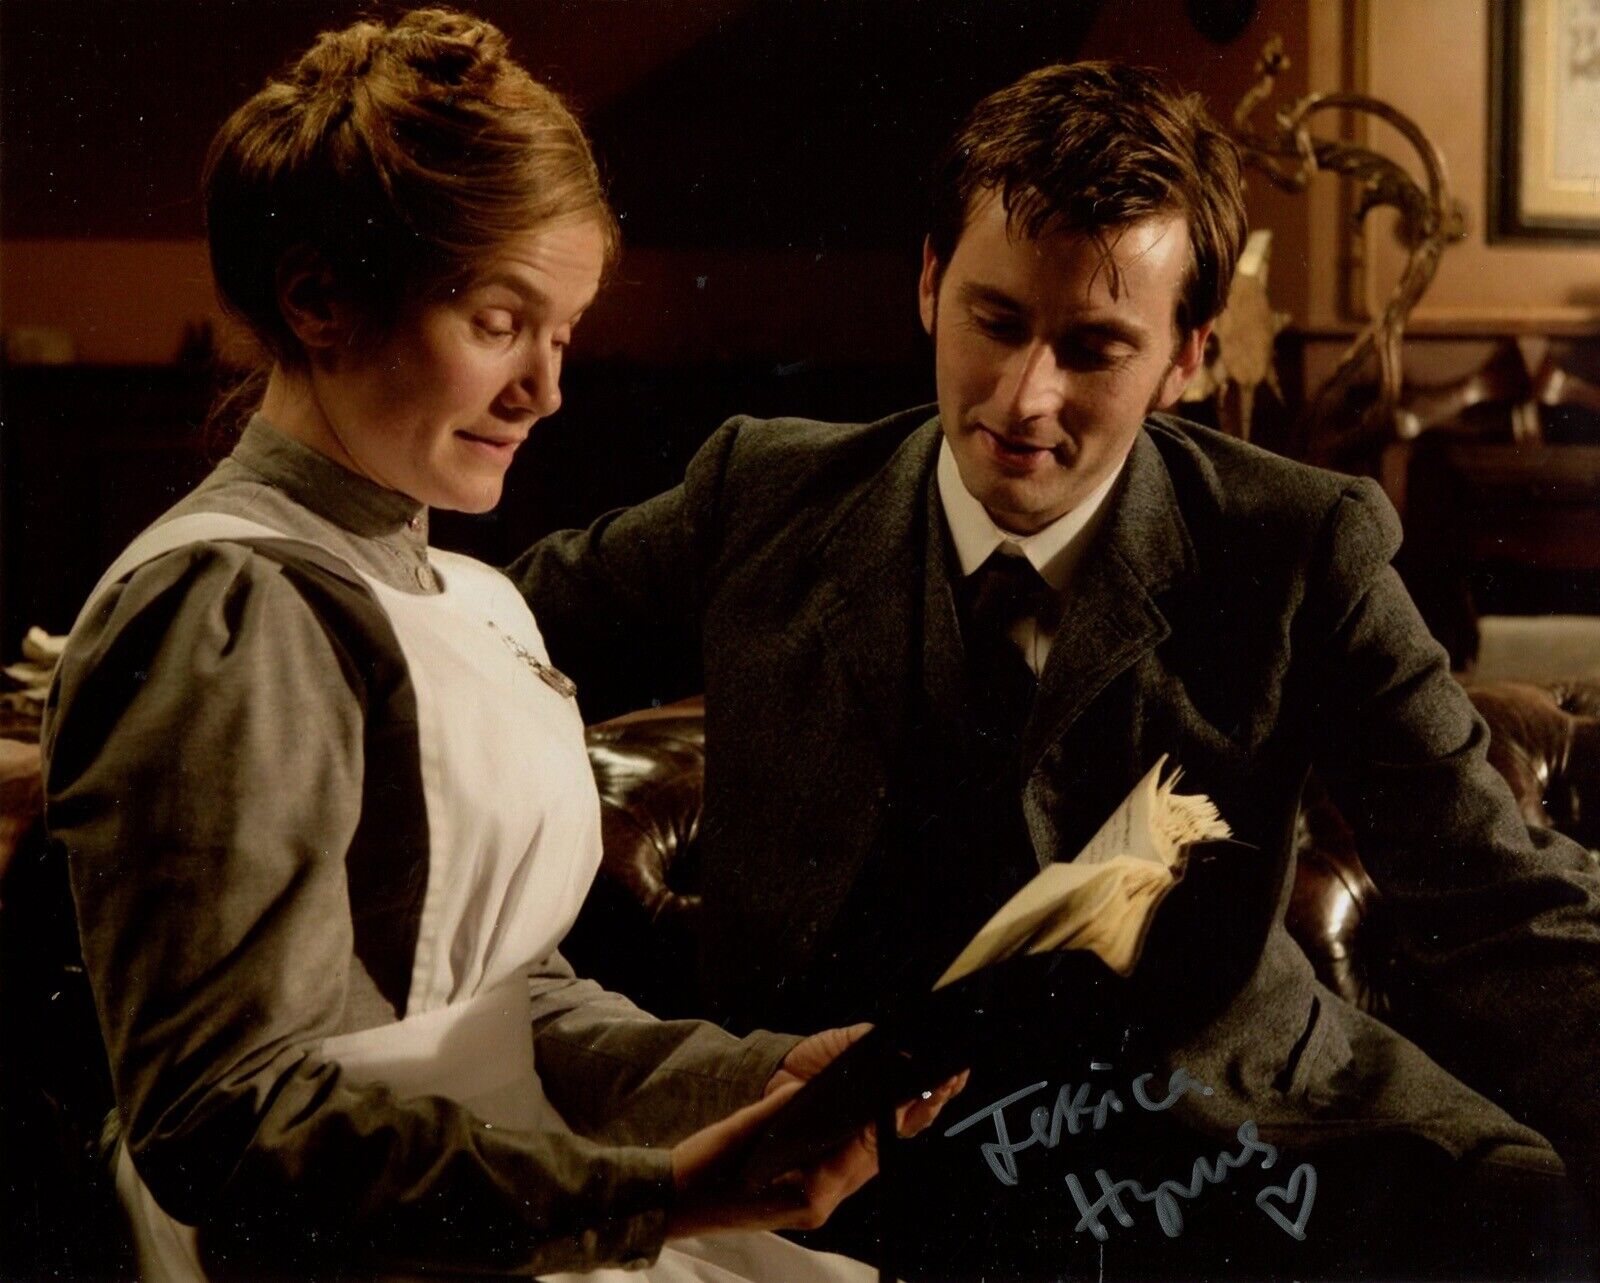 Actress Jessica Hynes signed DOCTOR WHO 8x10 scene Photo Poster painting - UACC DEALER